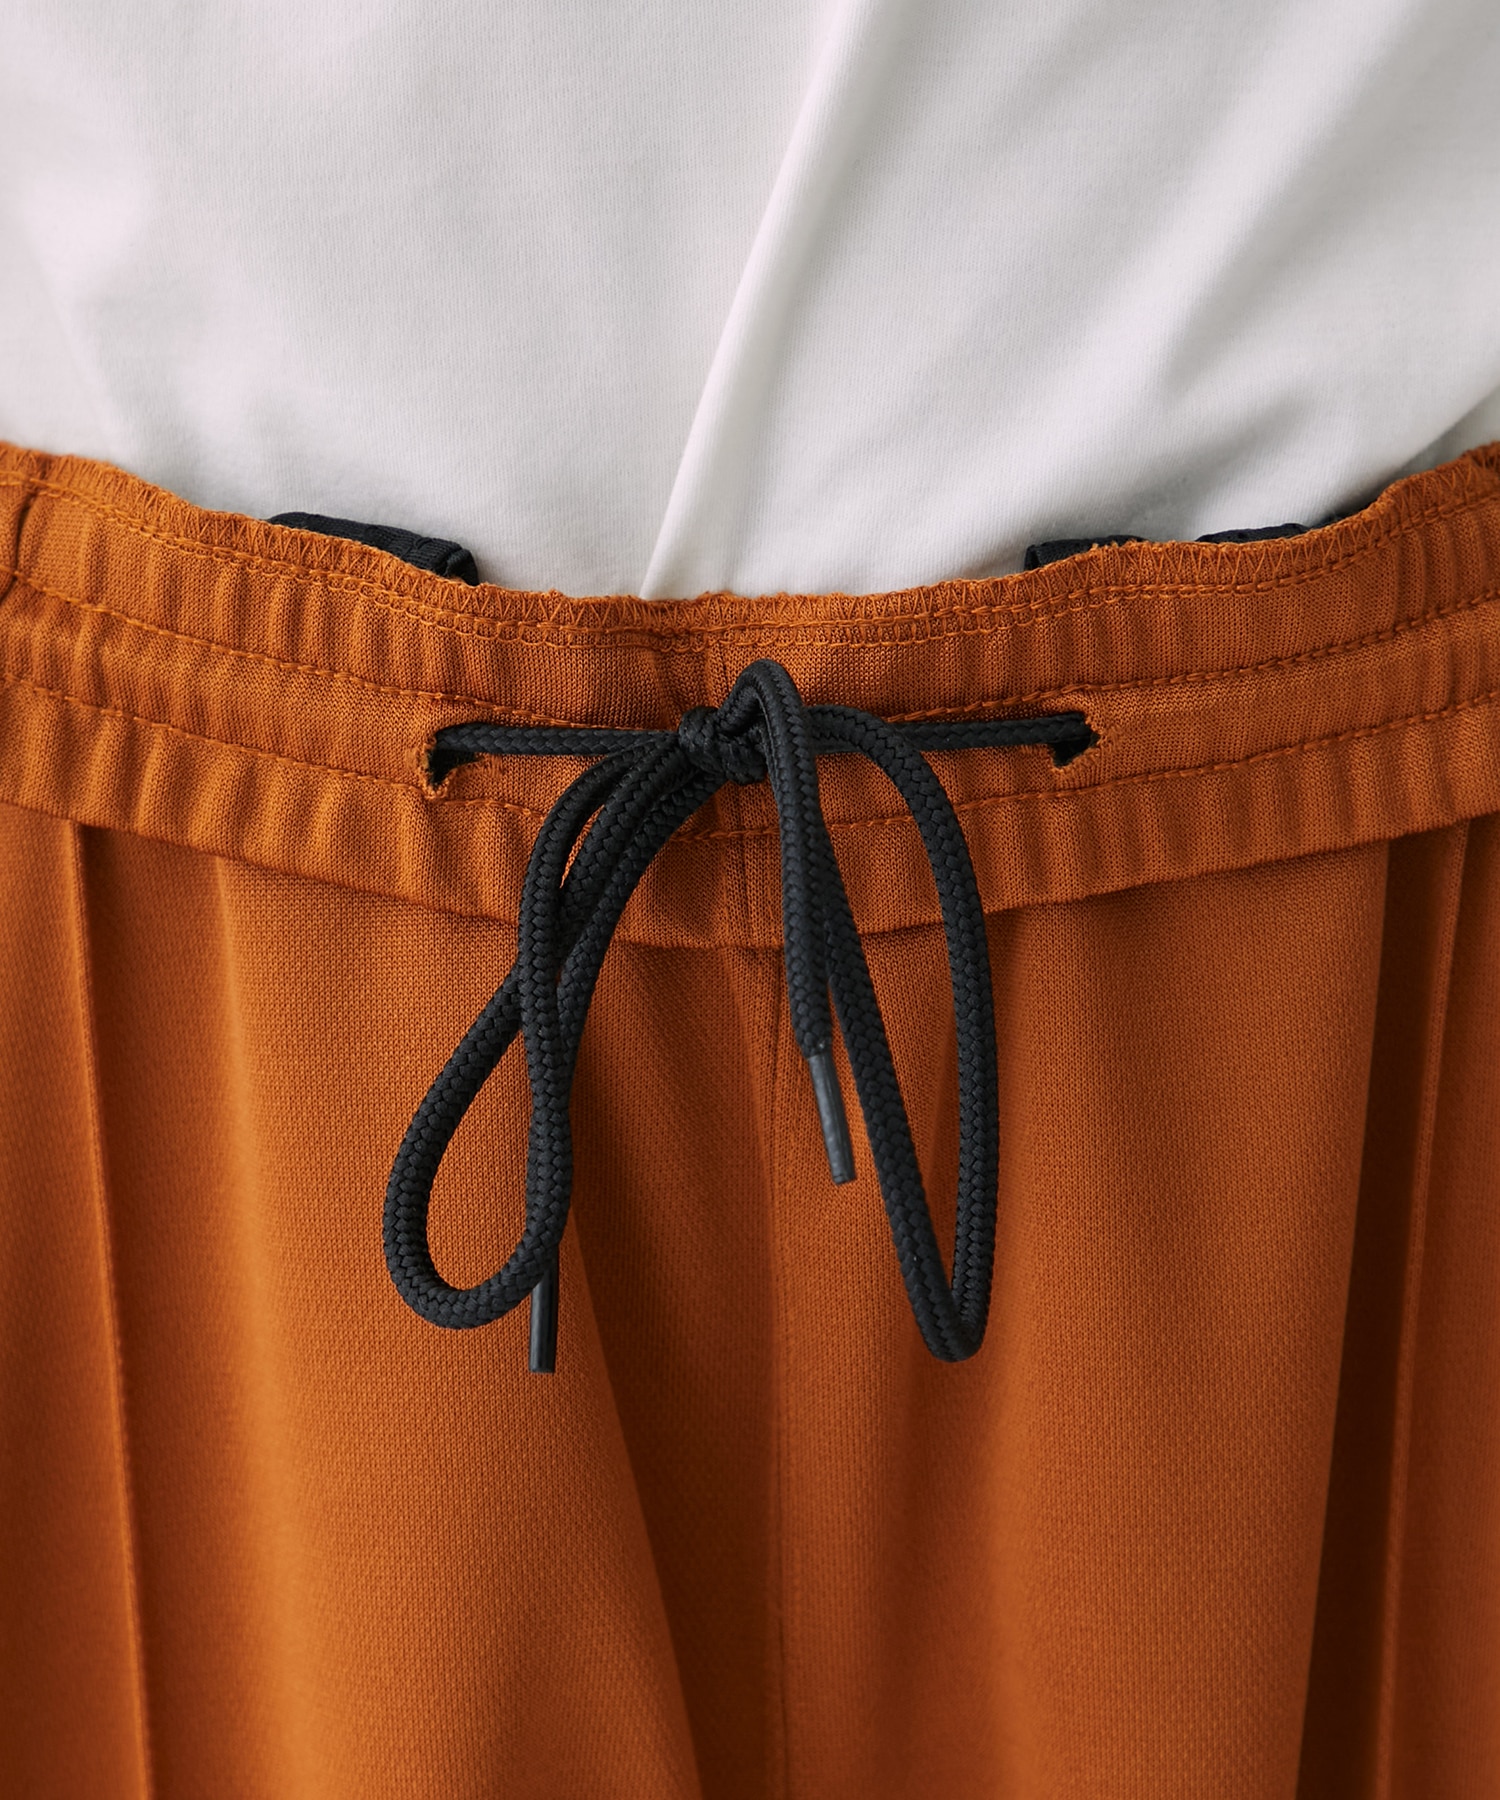 Track Pant - Poly Smooth NEEDLES